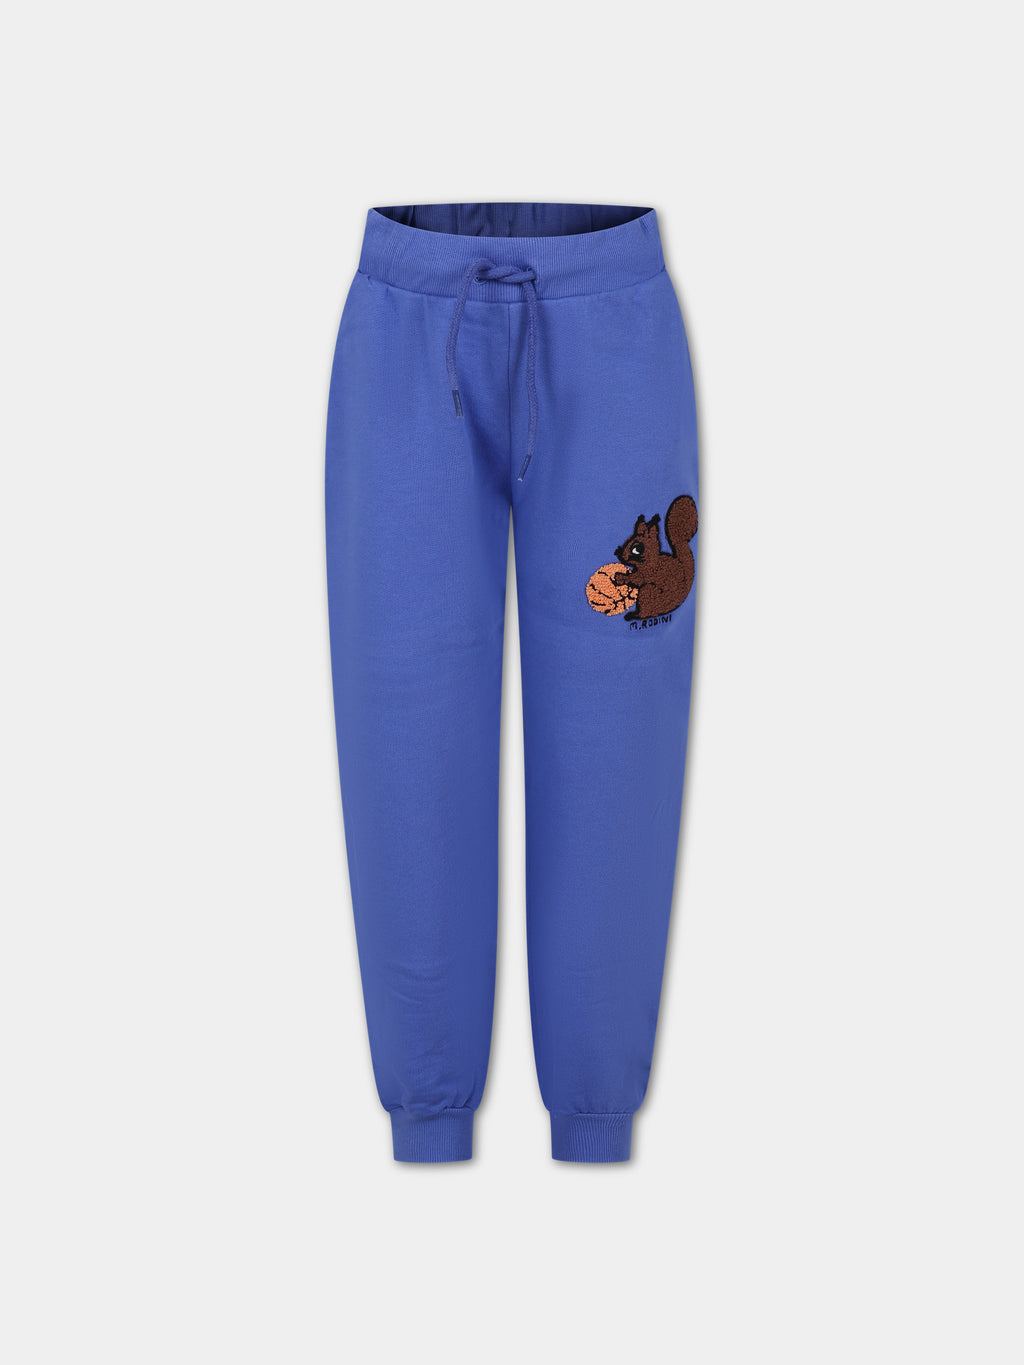 Light blue sports trousers for kids